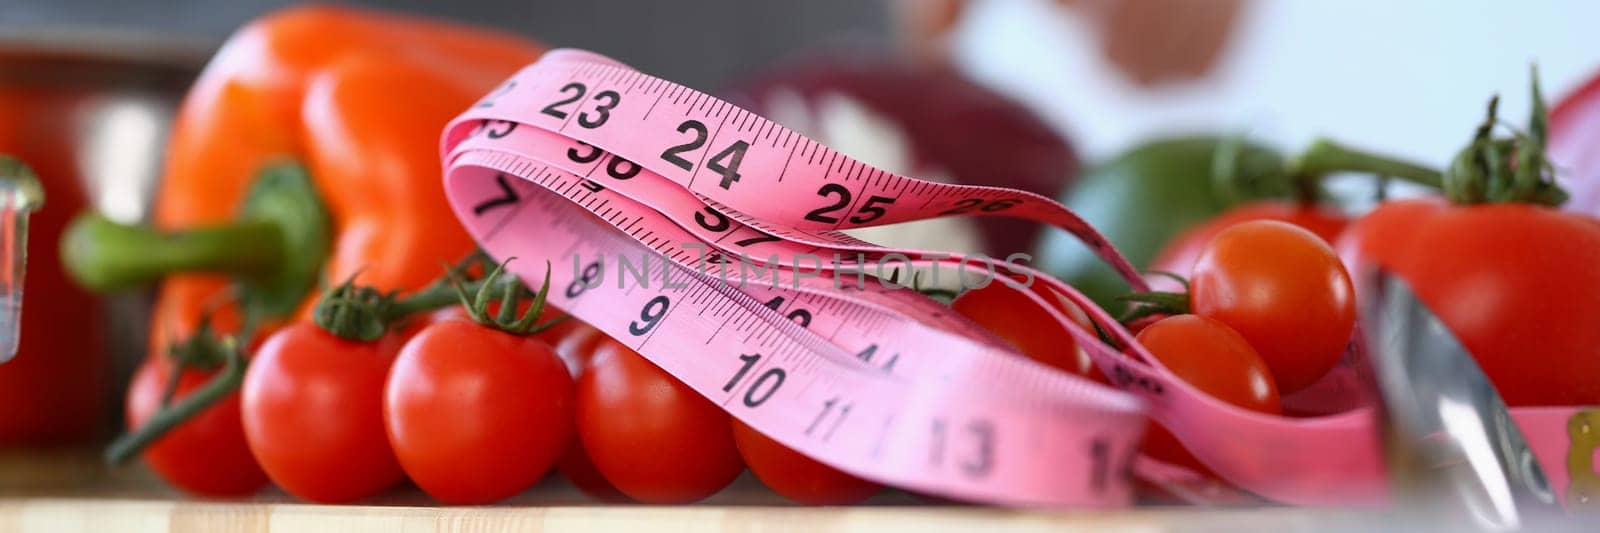 Red tomatoes measuring tape and vegetables in kitchen by kuprevich